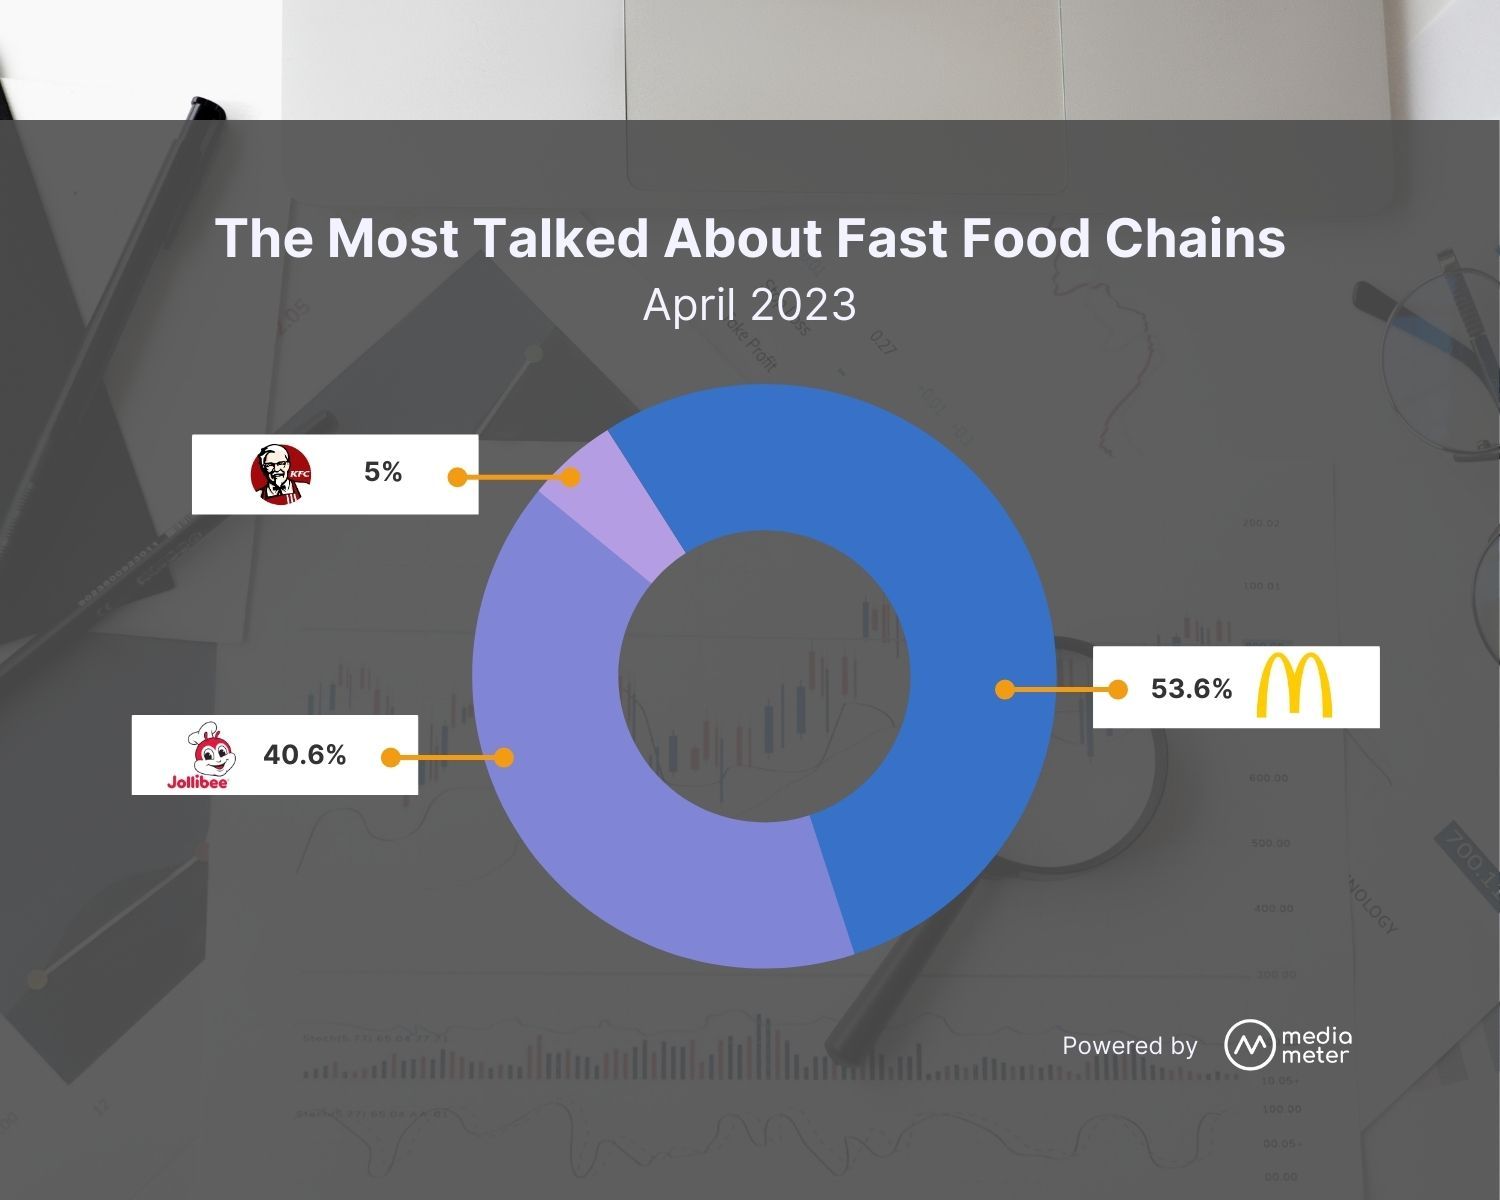 Media Meter Graph showing the Most Talked About Fast Food Chains, including logo of KFC, Jollibee and McDonald's